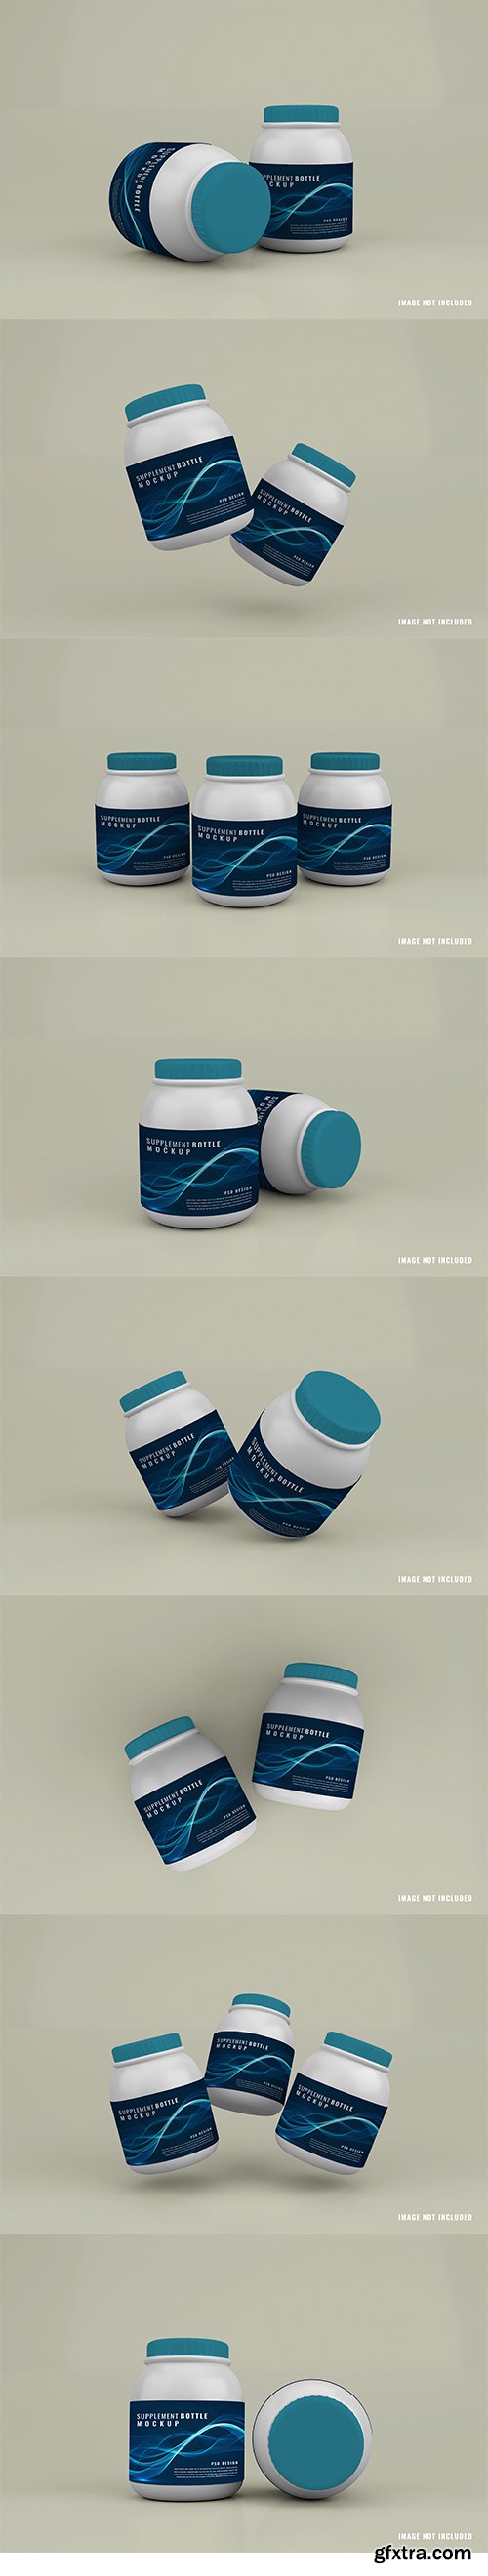 Supplement container package mockup